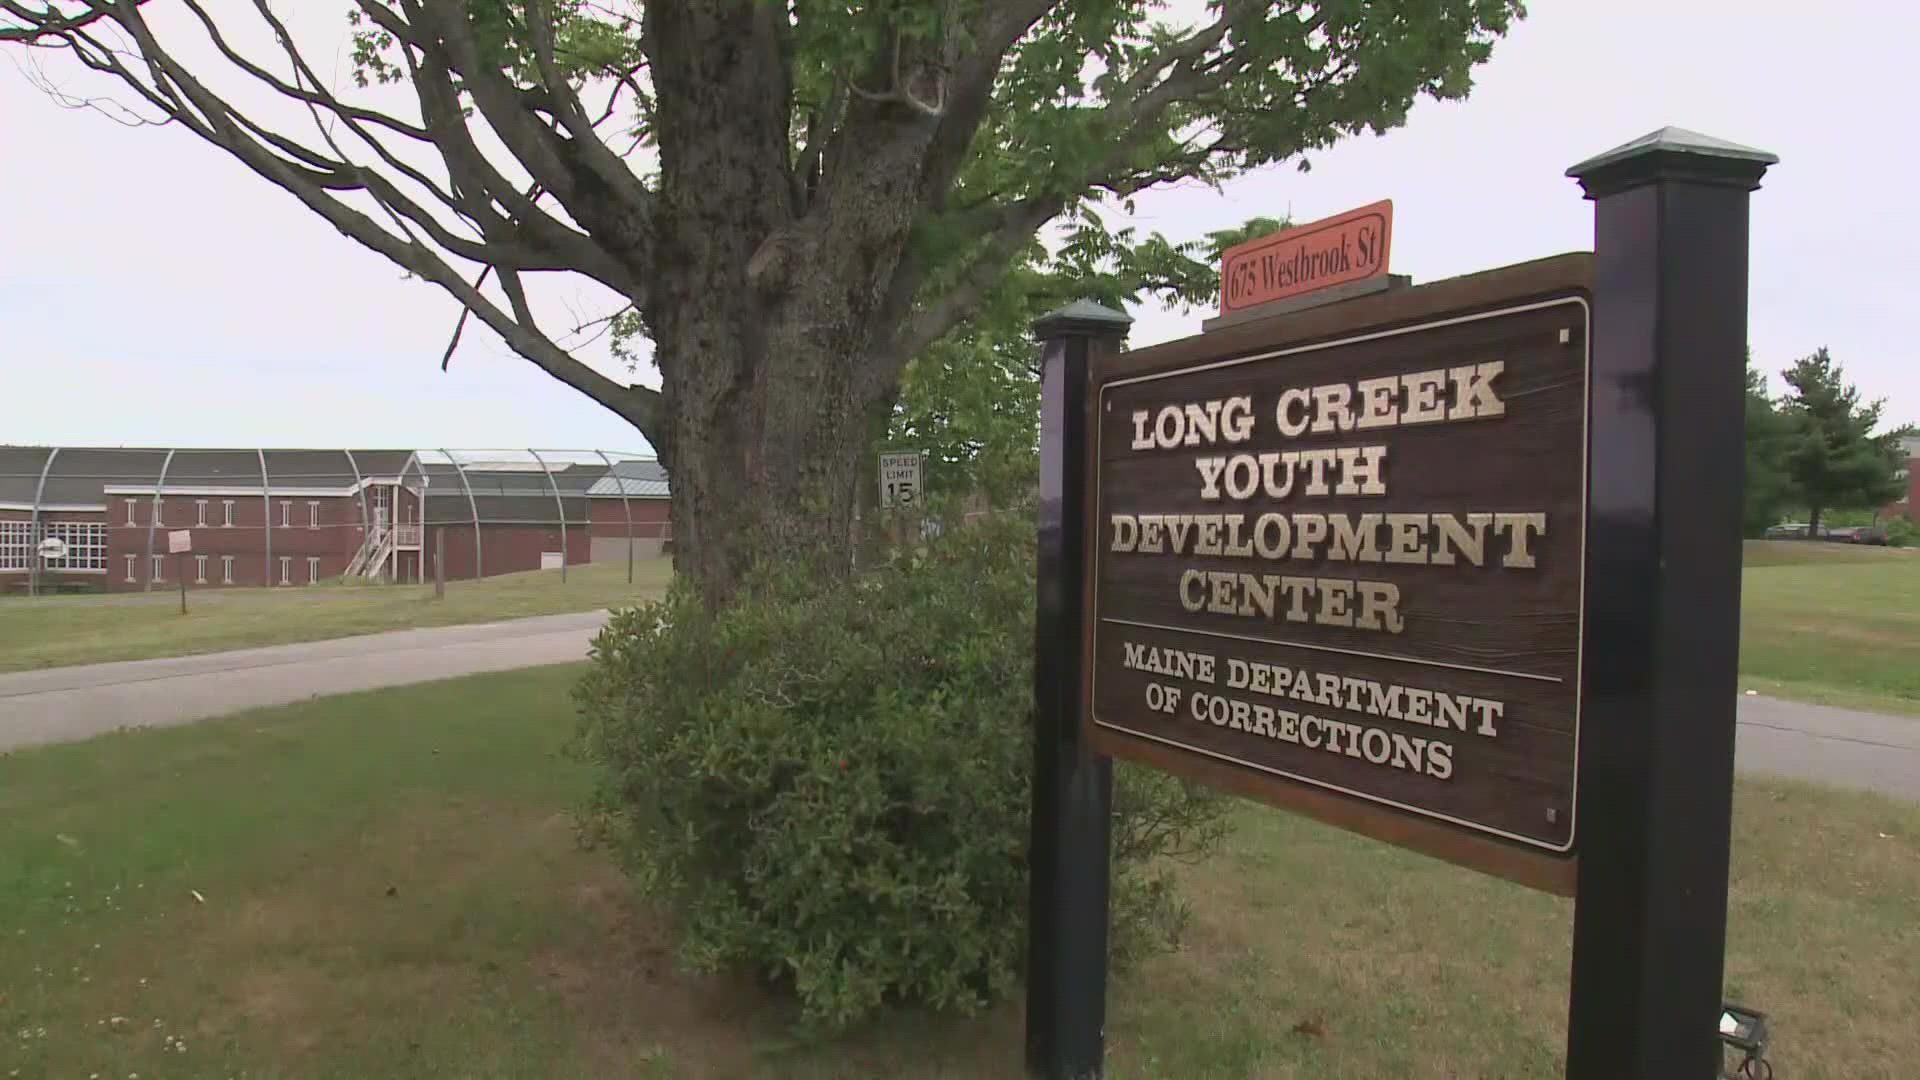 Long Creek Youth Development Center has been in hot water recently over its treatment of employees and children incarcerated there.